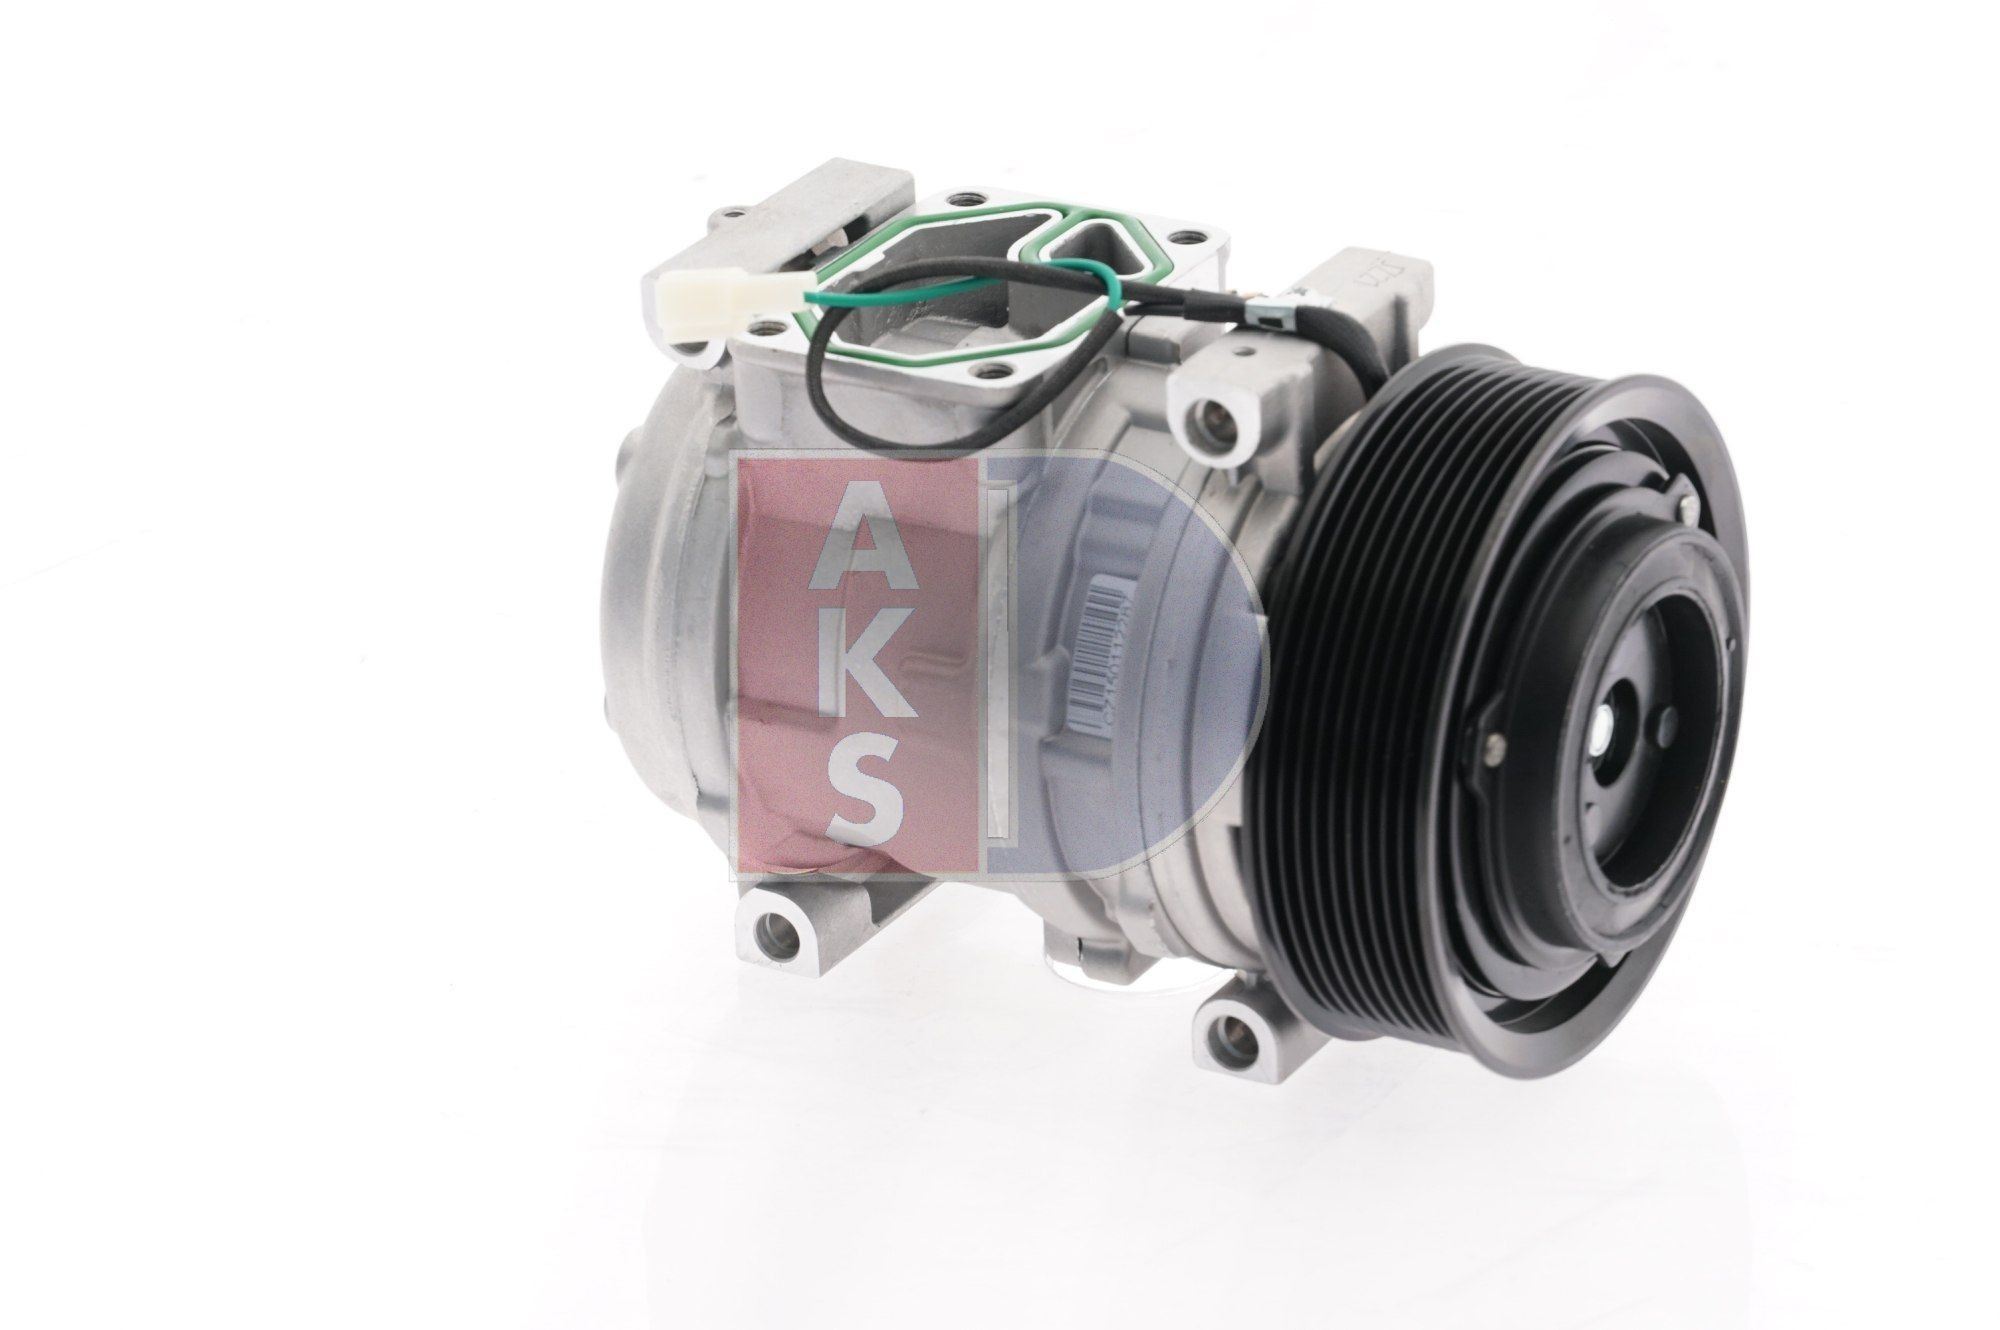 Air conditioning compressor 852070N from AKS DASIS